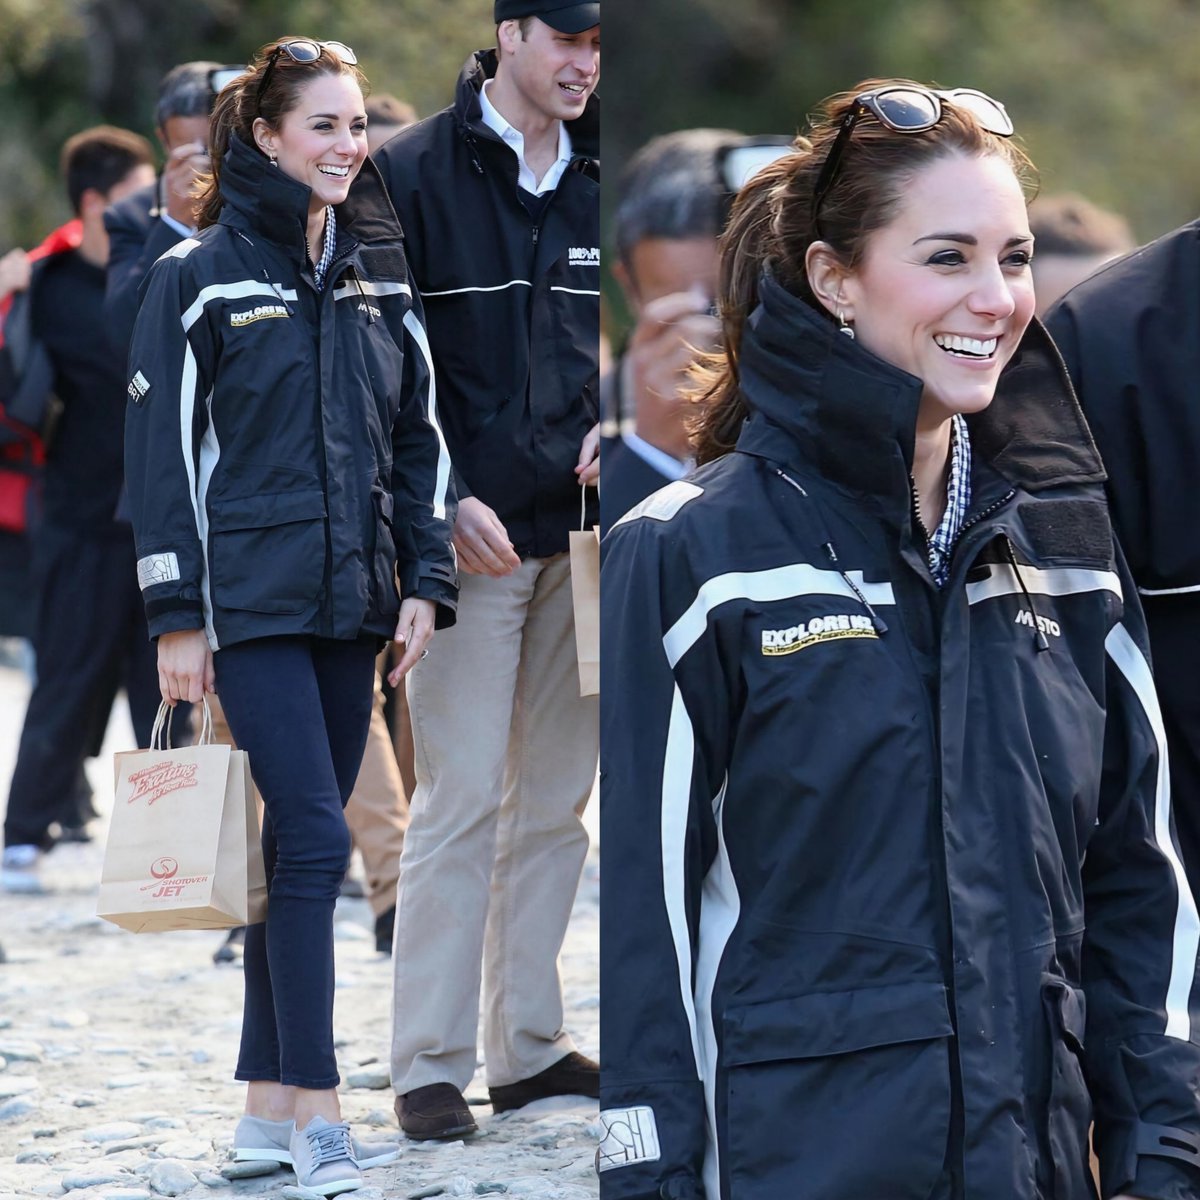 Princess Catherine at Shotover River in New Zealand on 13 April 2014
#PrincessofWales #PrincessCatherine #CatherinePrincessOfWales #TeamCatherine #TeamWales #RoyalFamily #IStandWithCatherine #CatherineWeLoveYou #CatherineIsQueen #PrincessCatherineOfWales @KensingtonRoyal